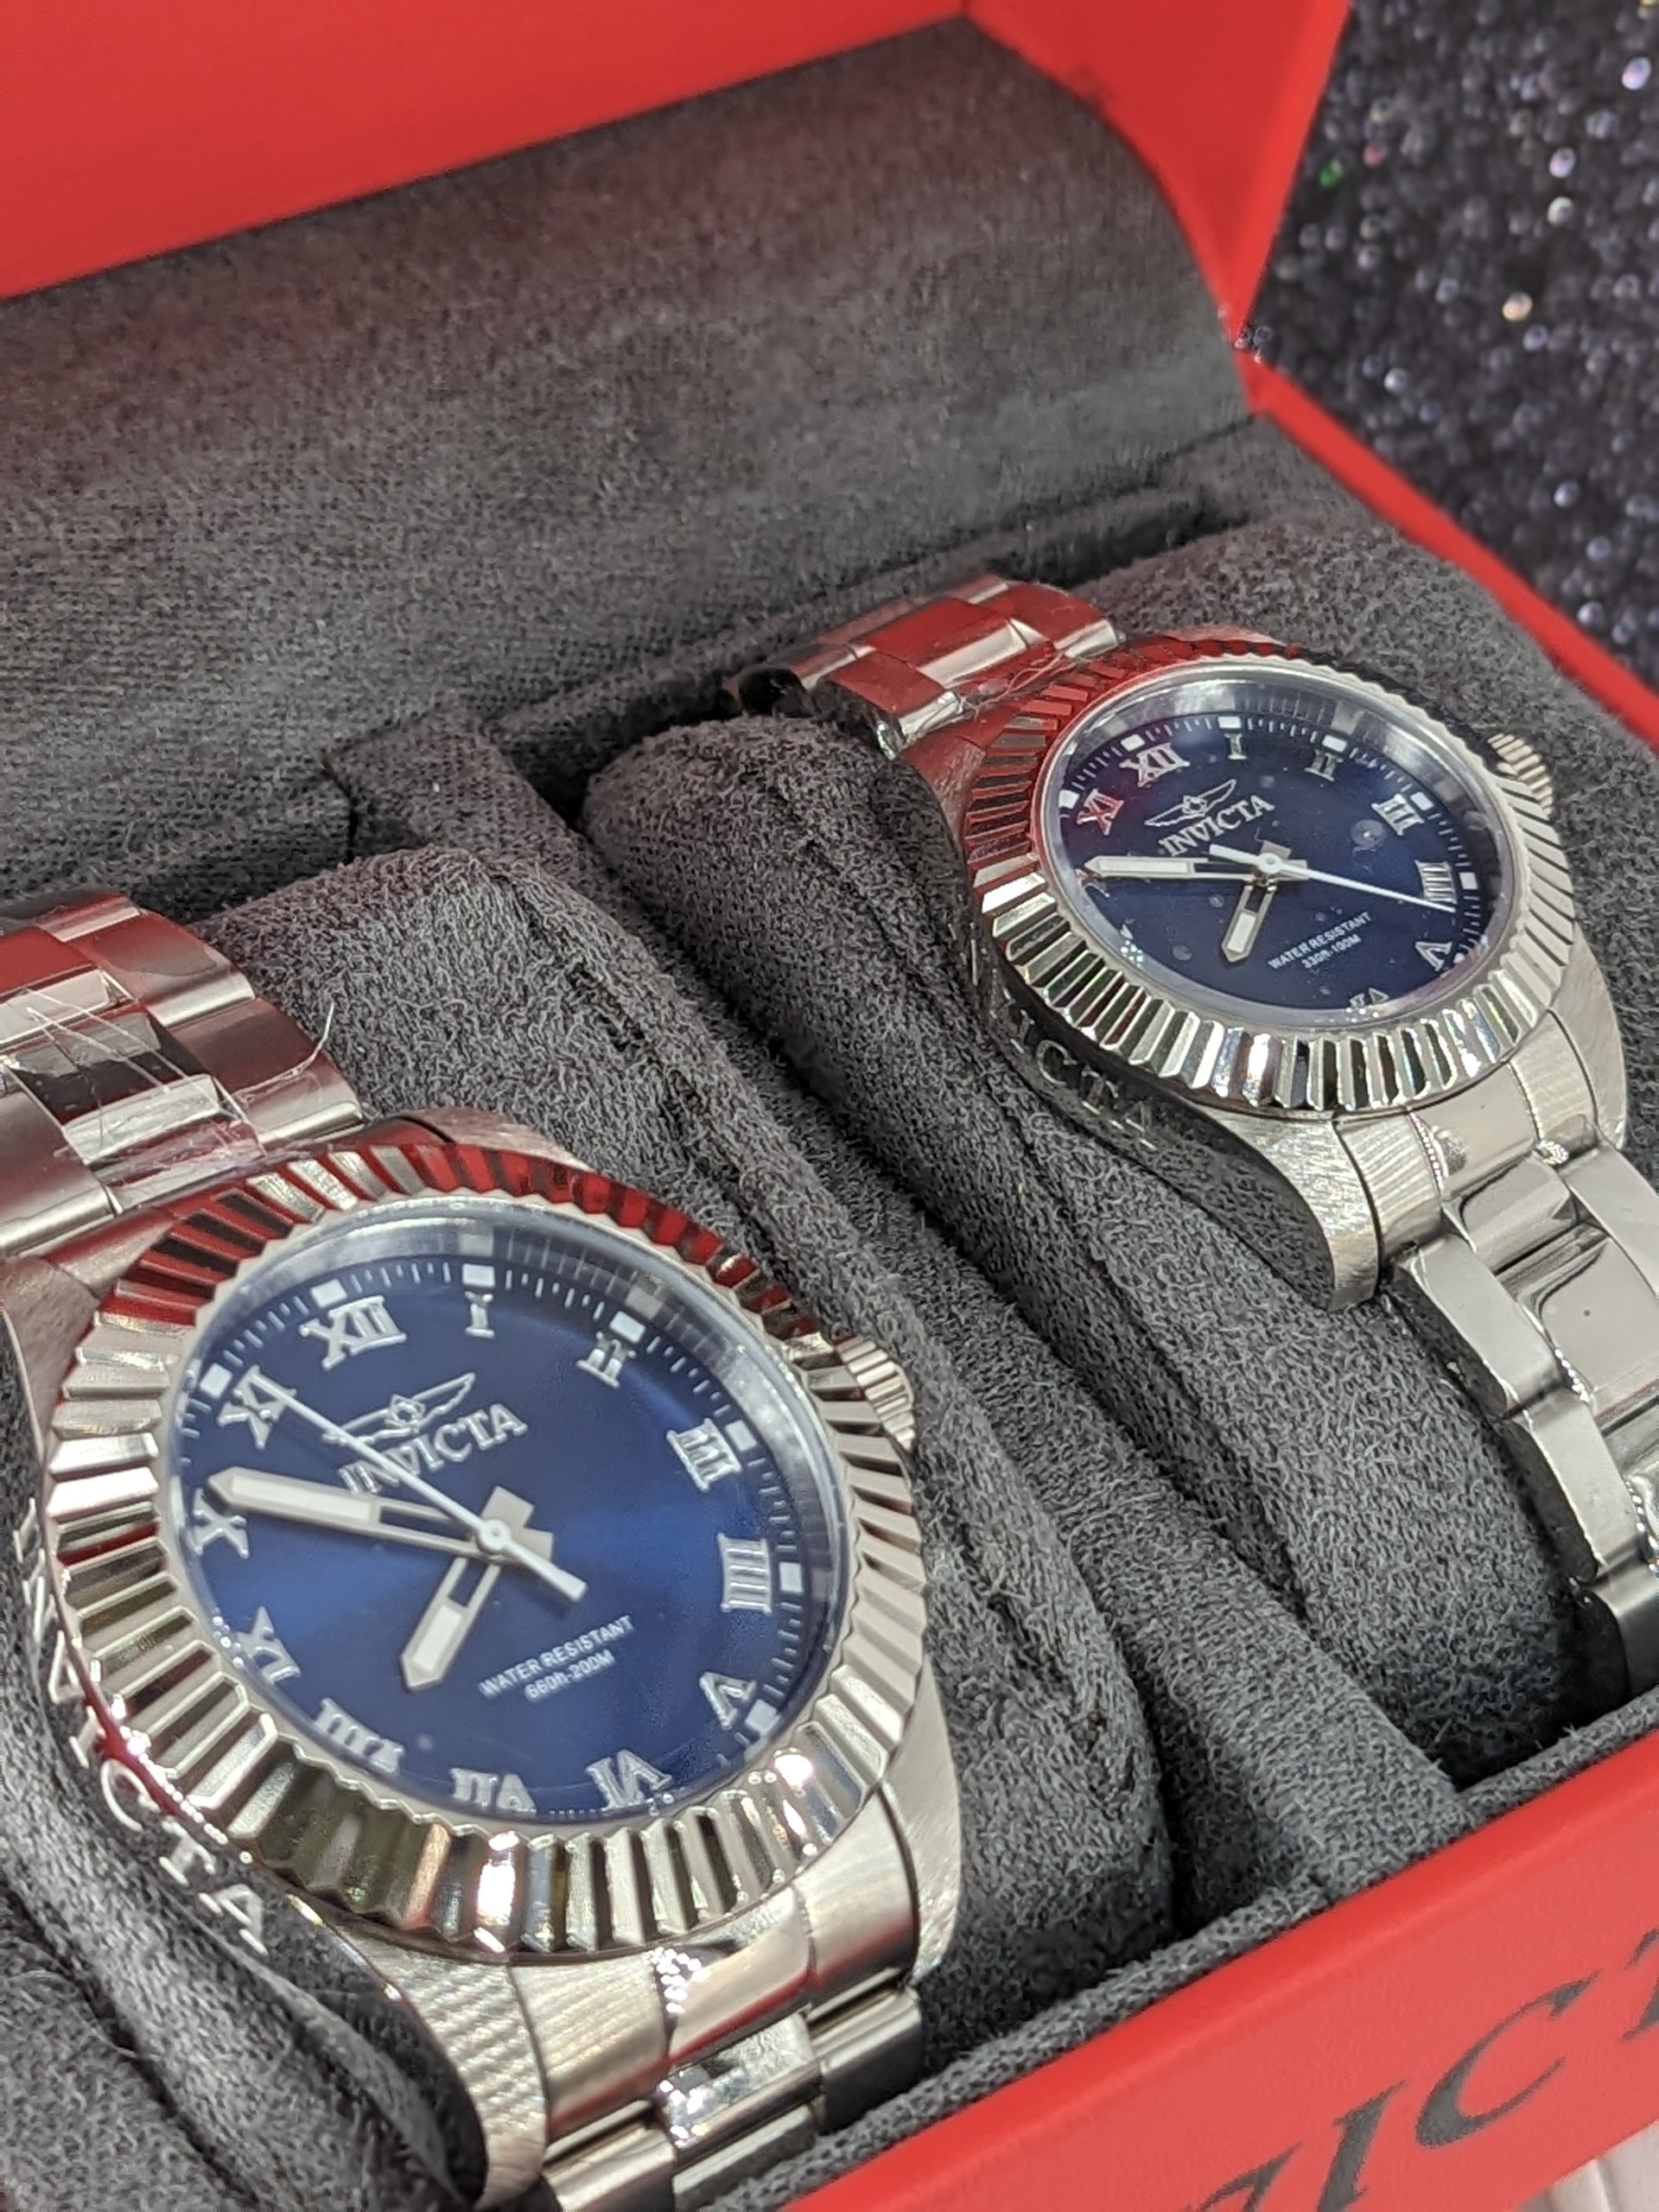 Invicta his and hers matching watch set